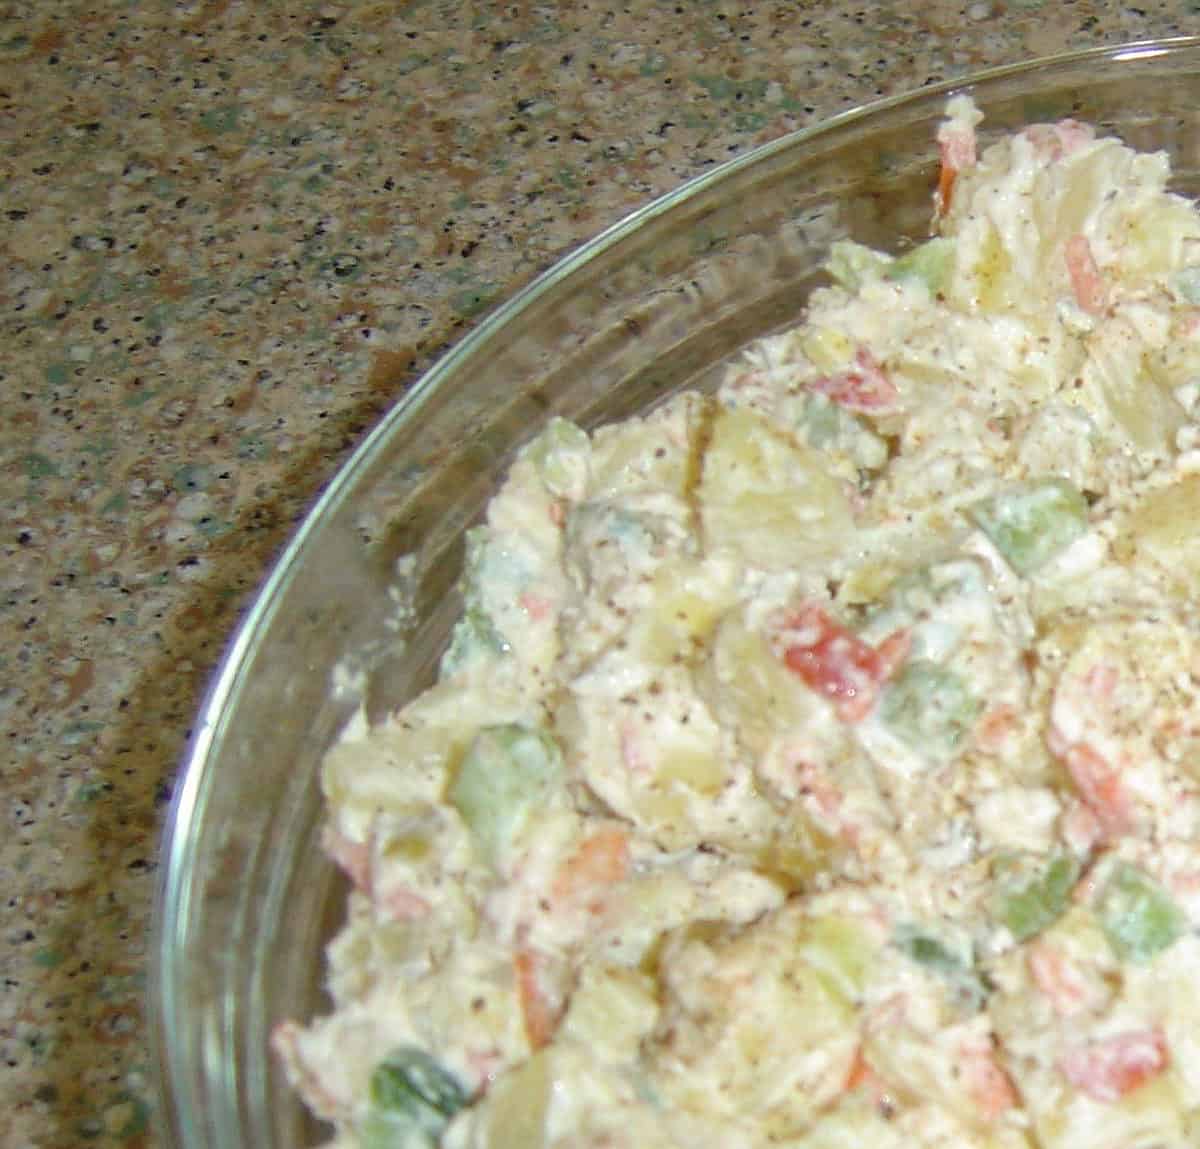  A colorful medley of flavors in Shirley's shrimp potato salad.